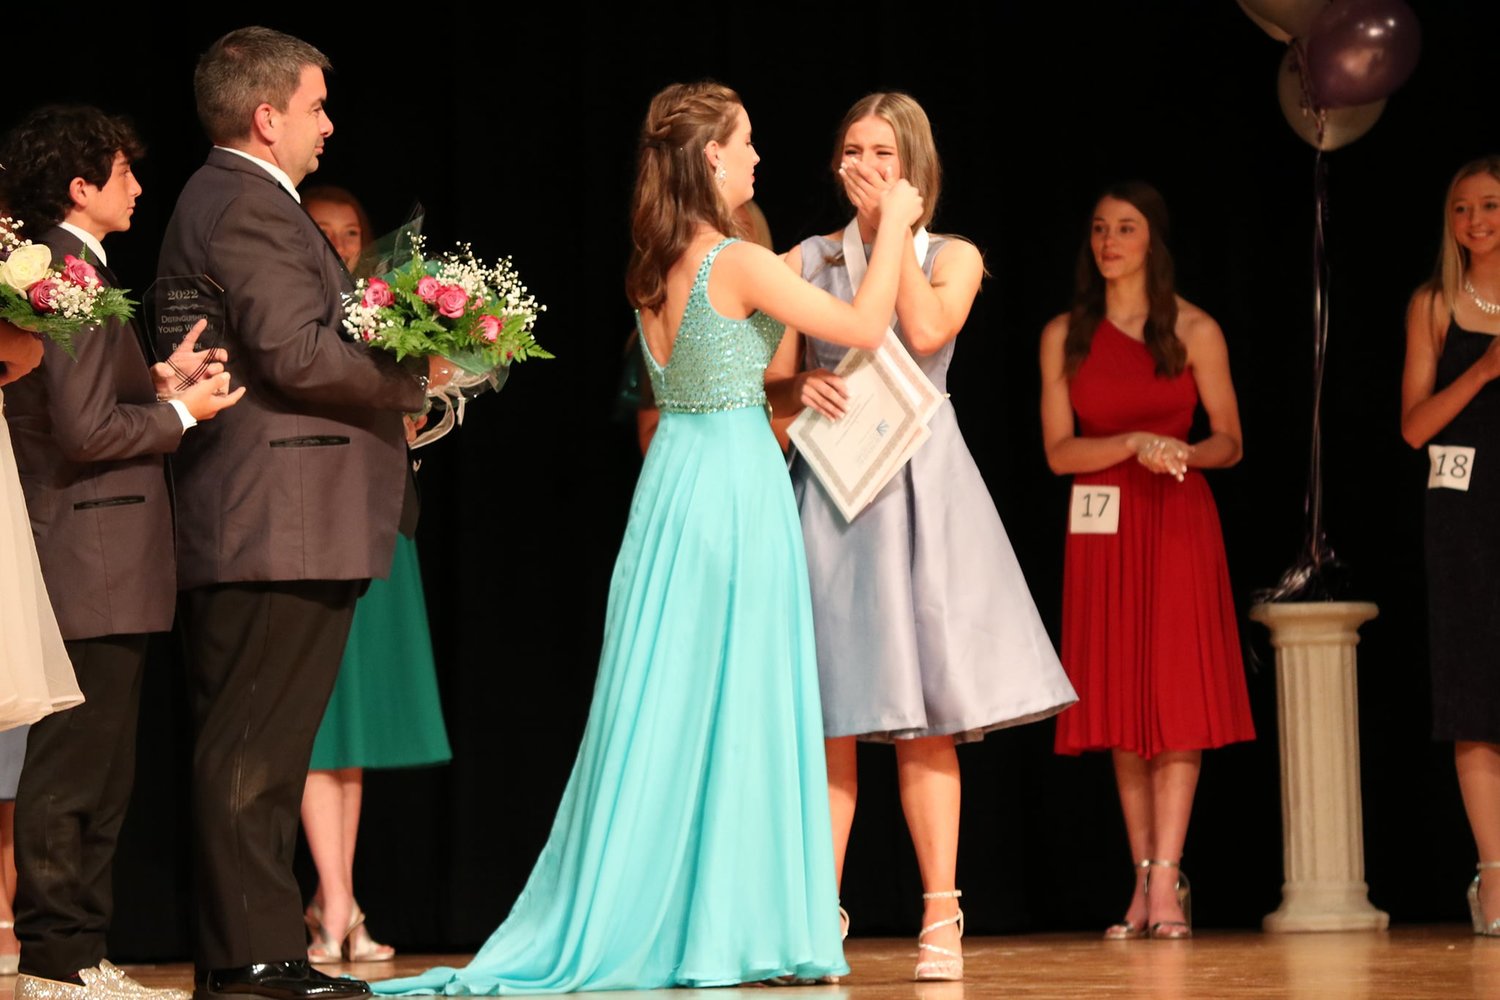 Madeline Shipman, center, was selected as Baldwin County Distinguished Young Woman for 2022. In addition to winning the title, Madeline also won preliminary awards for fitness, self-expression, and talent. Rounding out the top five included, from left, Katelyn Few, third runner-up; Grace Covo, first runner-up; Georgia Byrd, second runner-up; and Ashlyn Hudson, fourth runner-up.